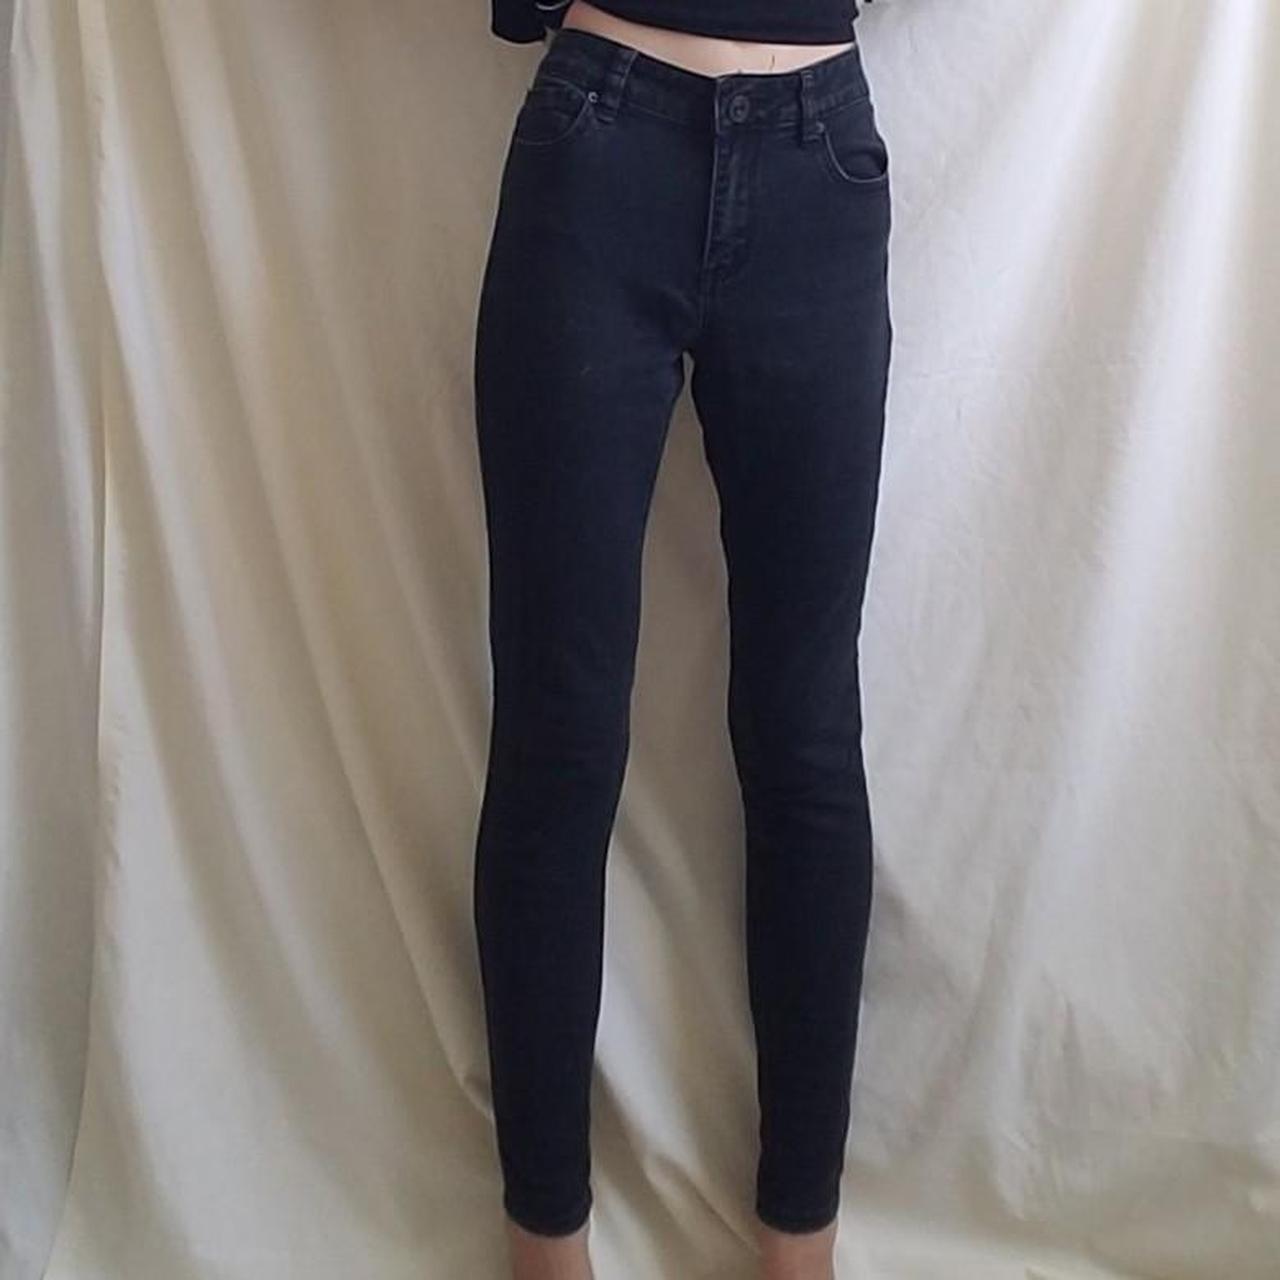 Y2K pullon black Jeggings. From the early 2000's has - Depop